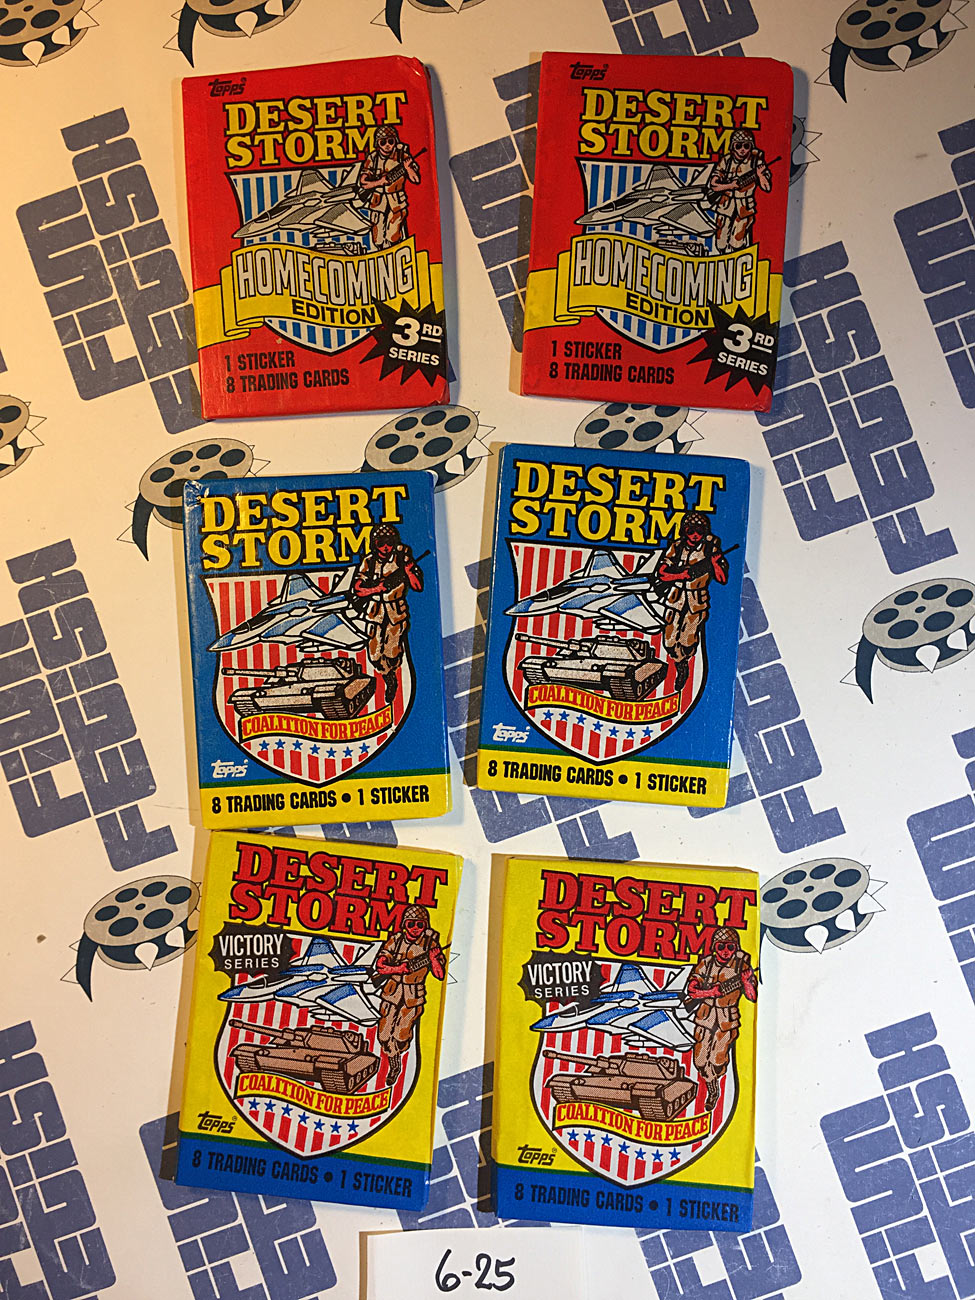 Set of 6 Sealed Topps Desert Storm Trading Card Wax Packs, Homecoming, Coalition For Peace, Victory Series [625]